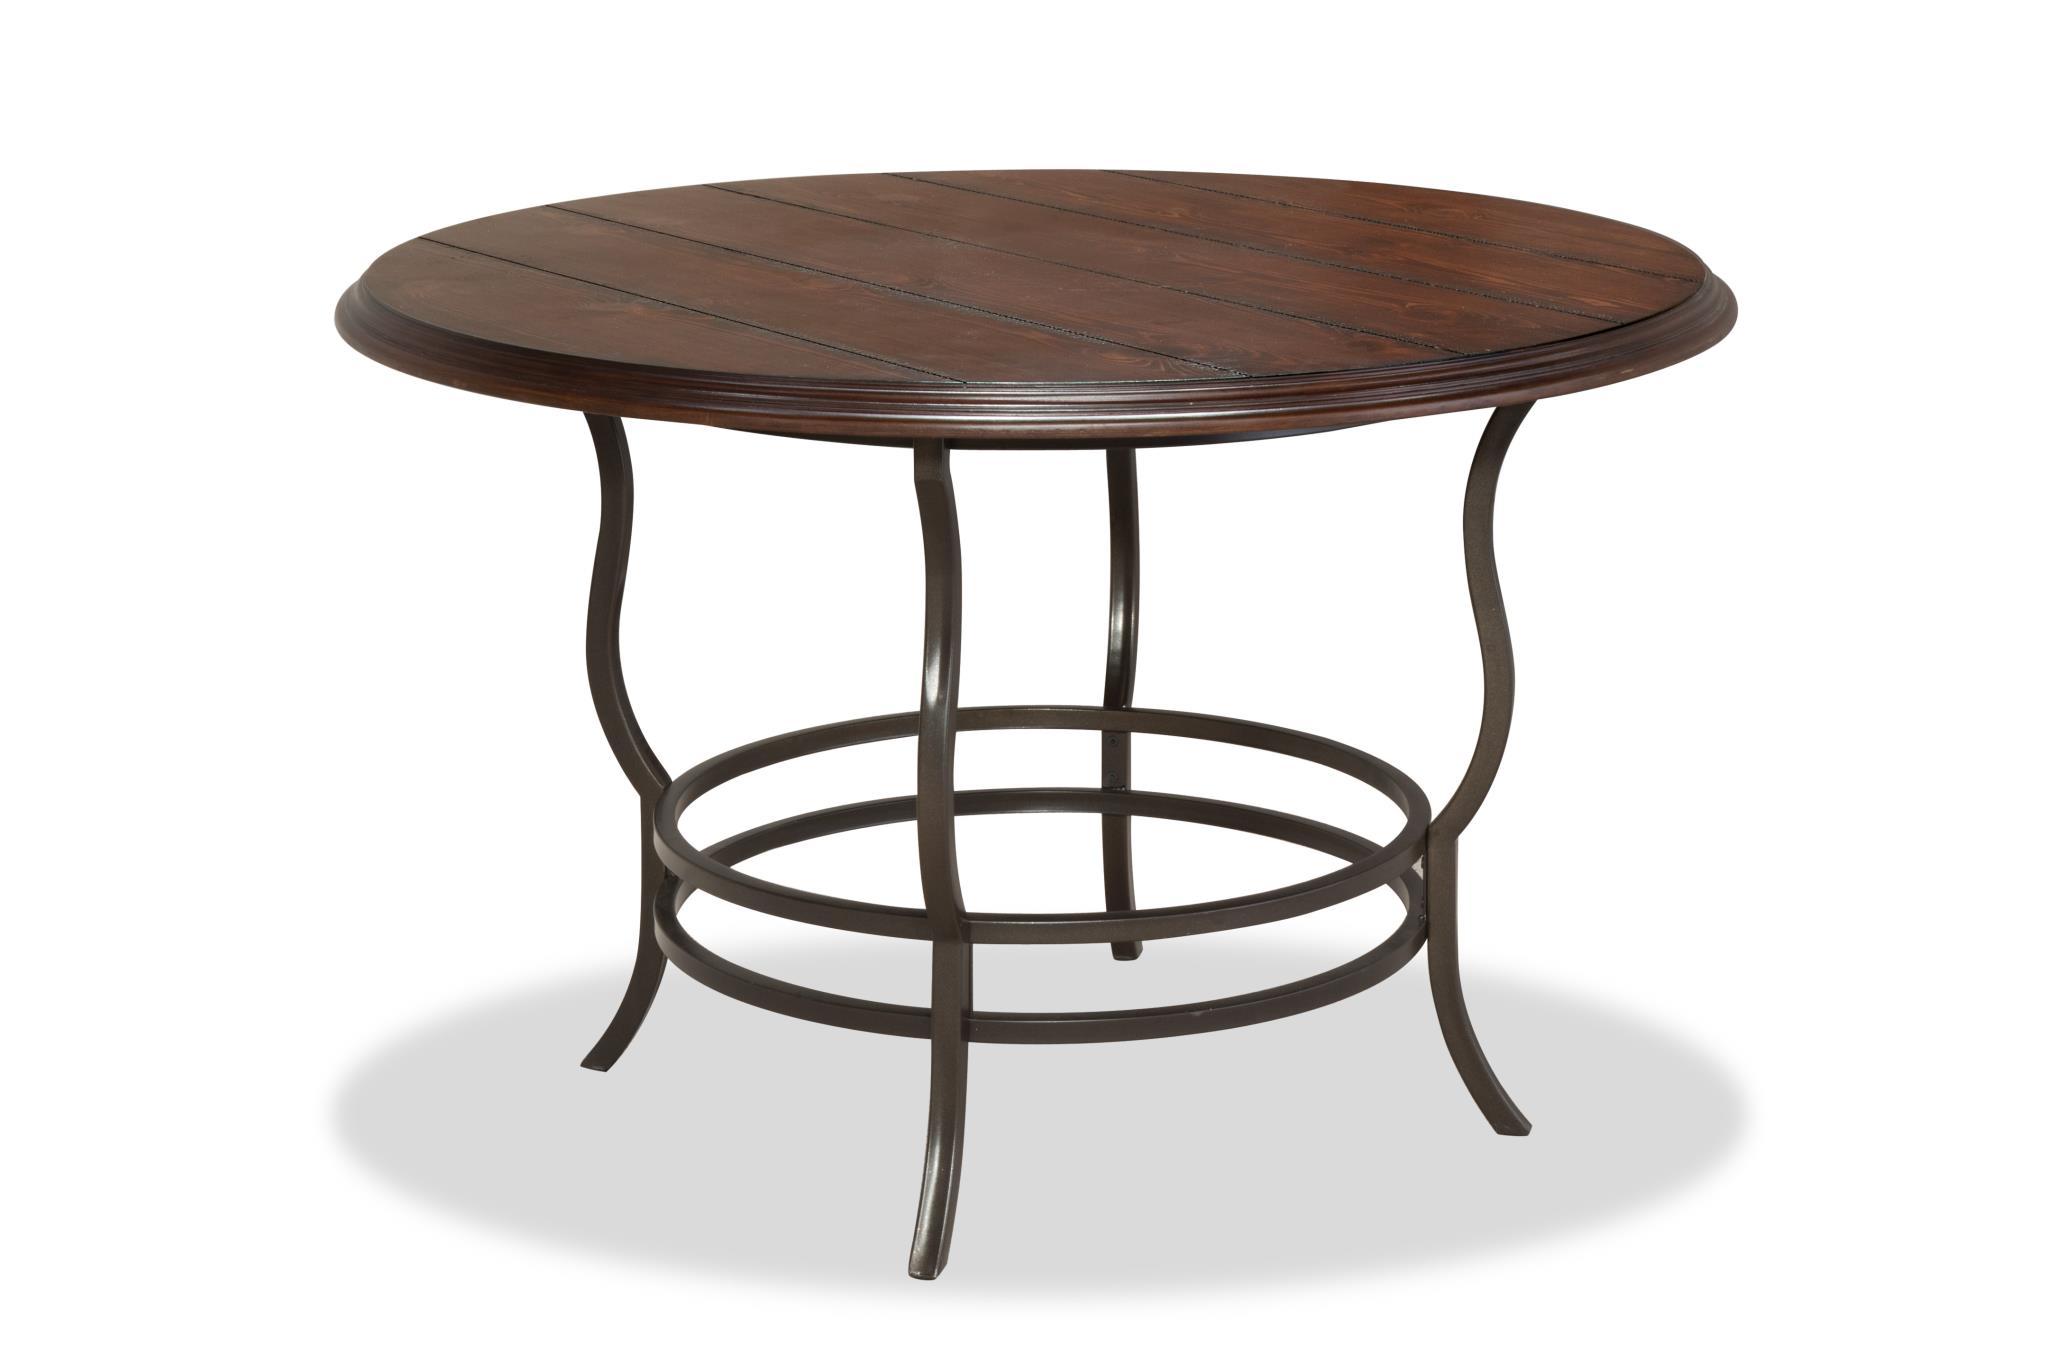 Transitional, Farmhouse Dining Table Midland 4652 in Brown 